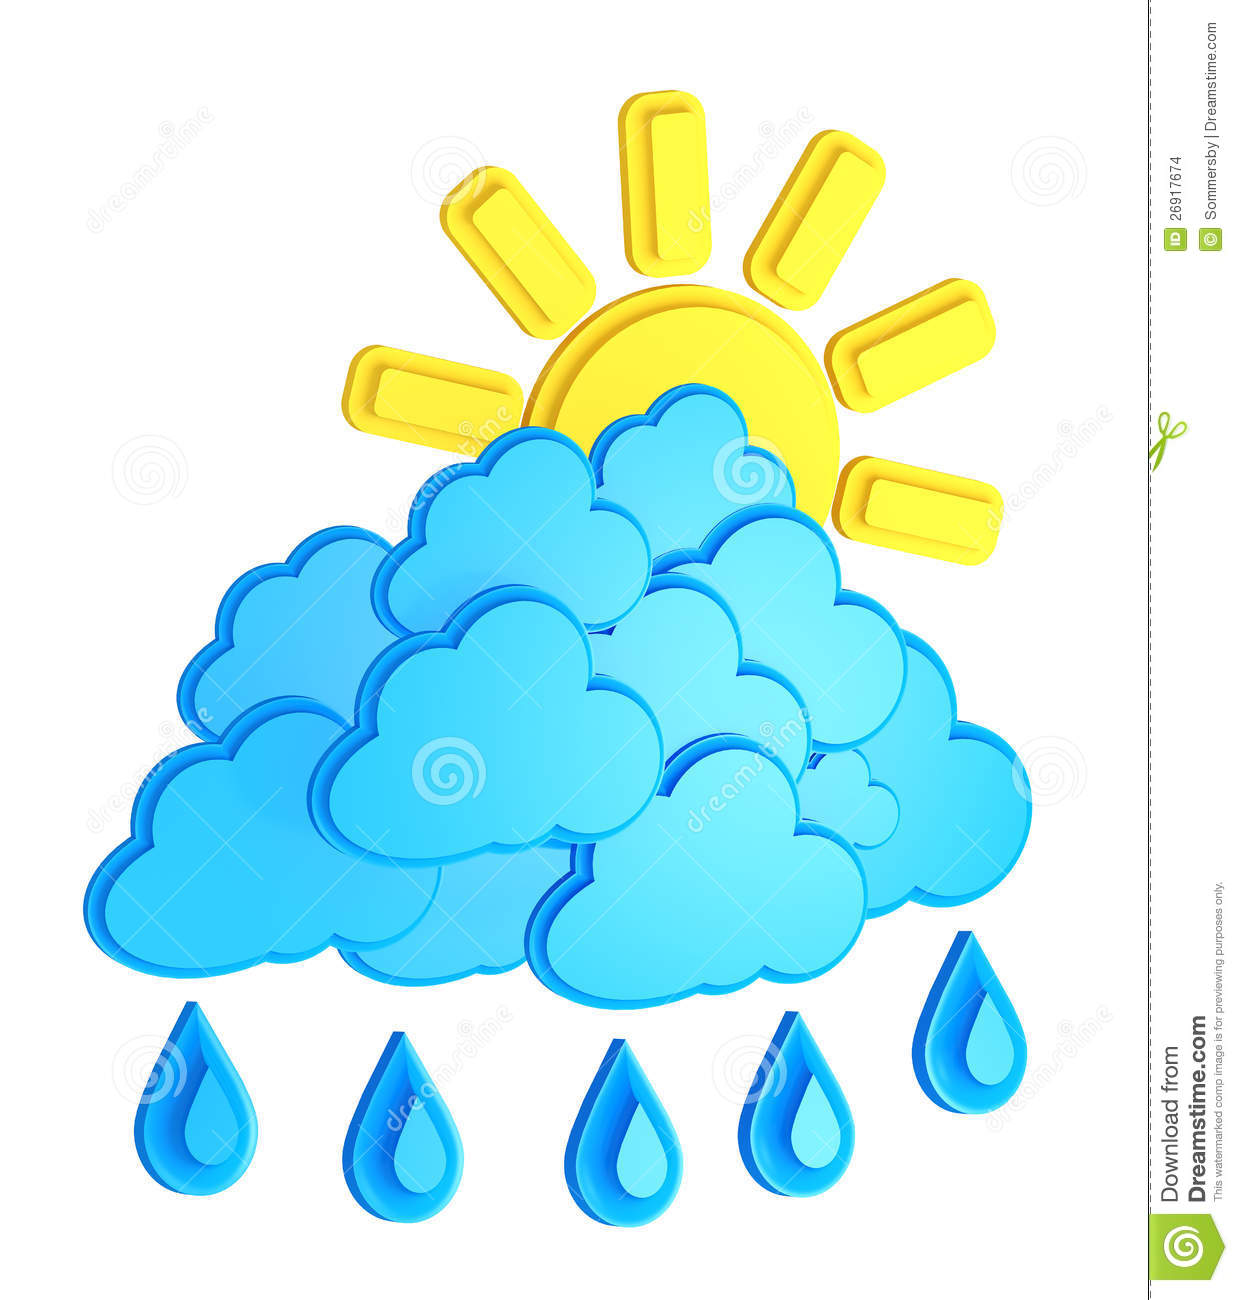 Sun Clouds And Rain   Weather Forecast Stock Images   Image  26917674